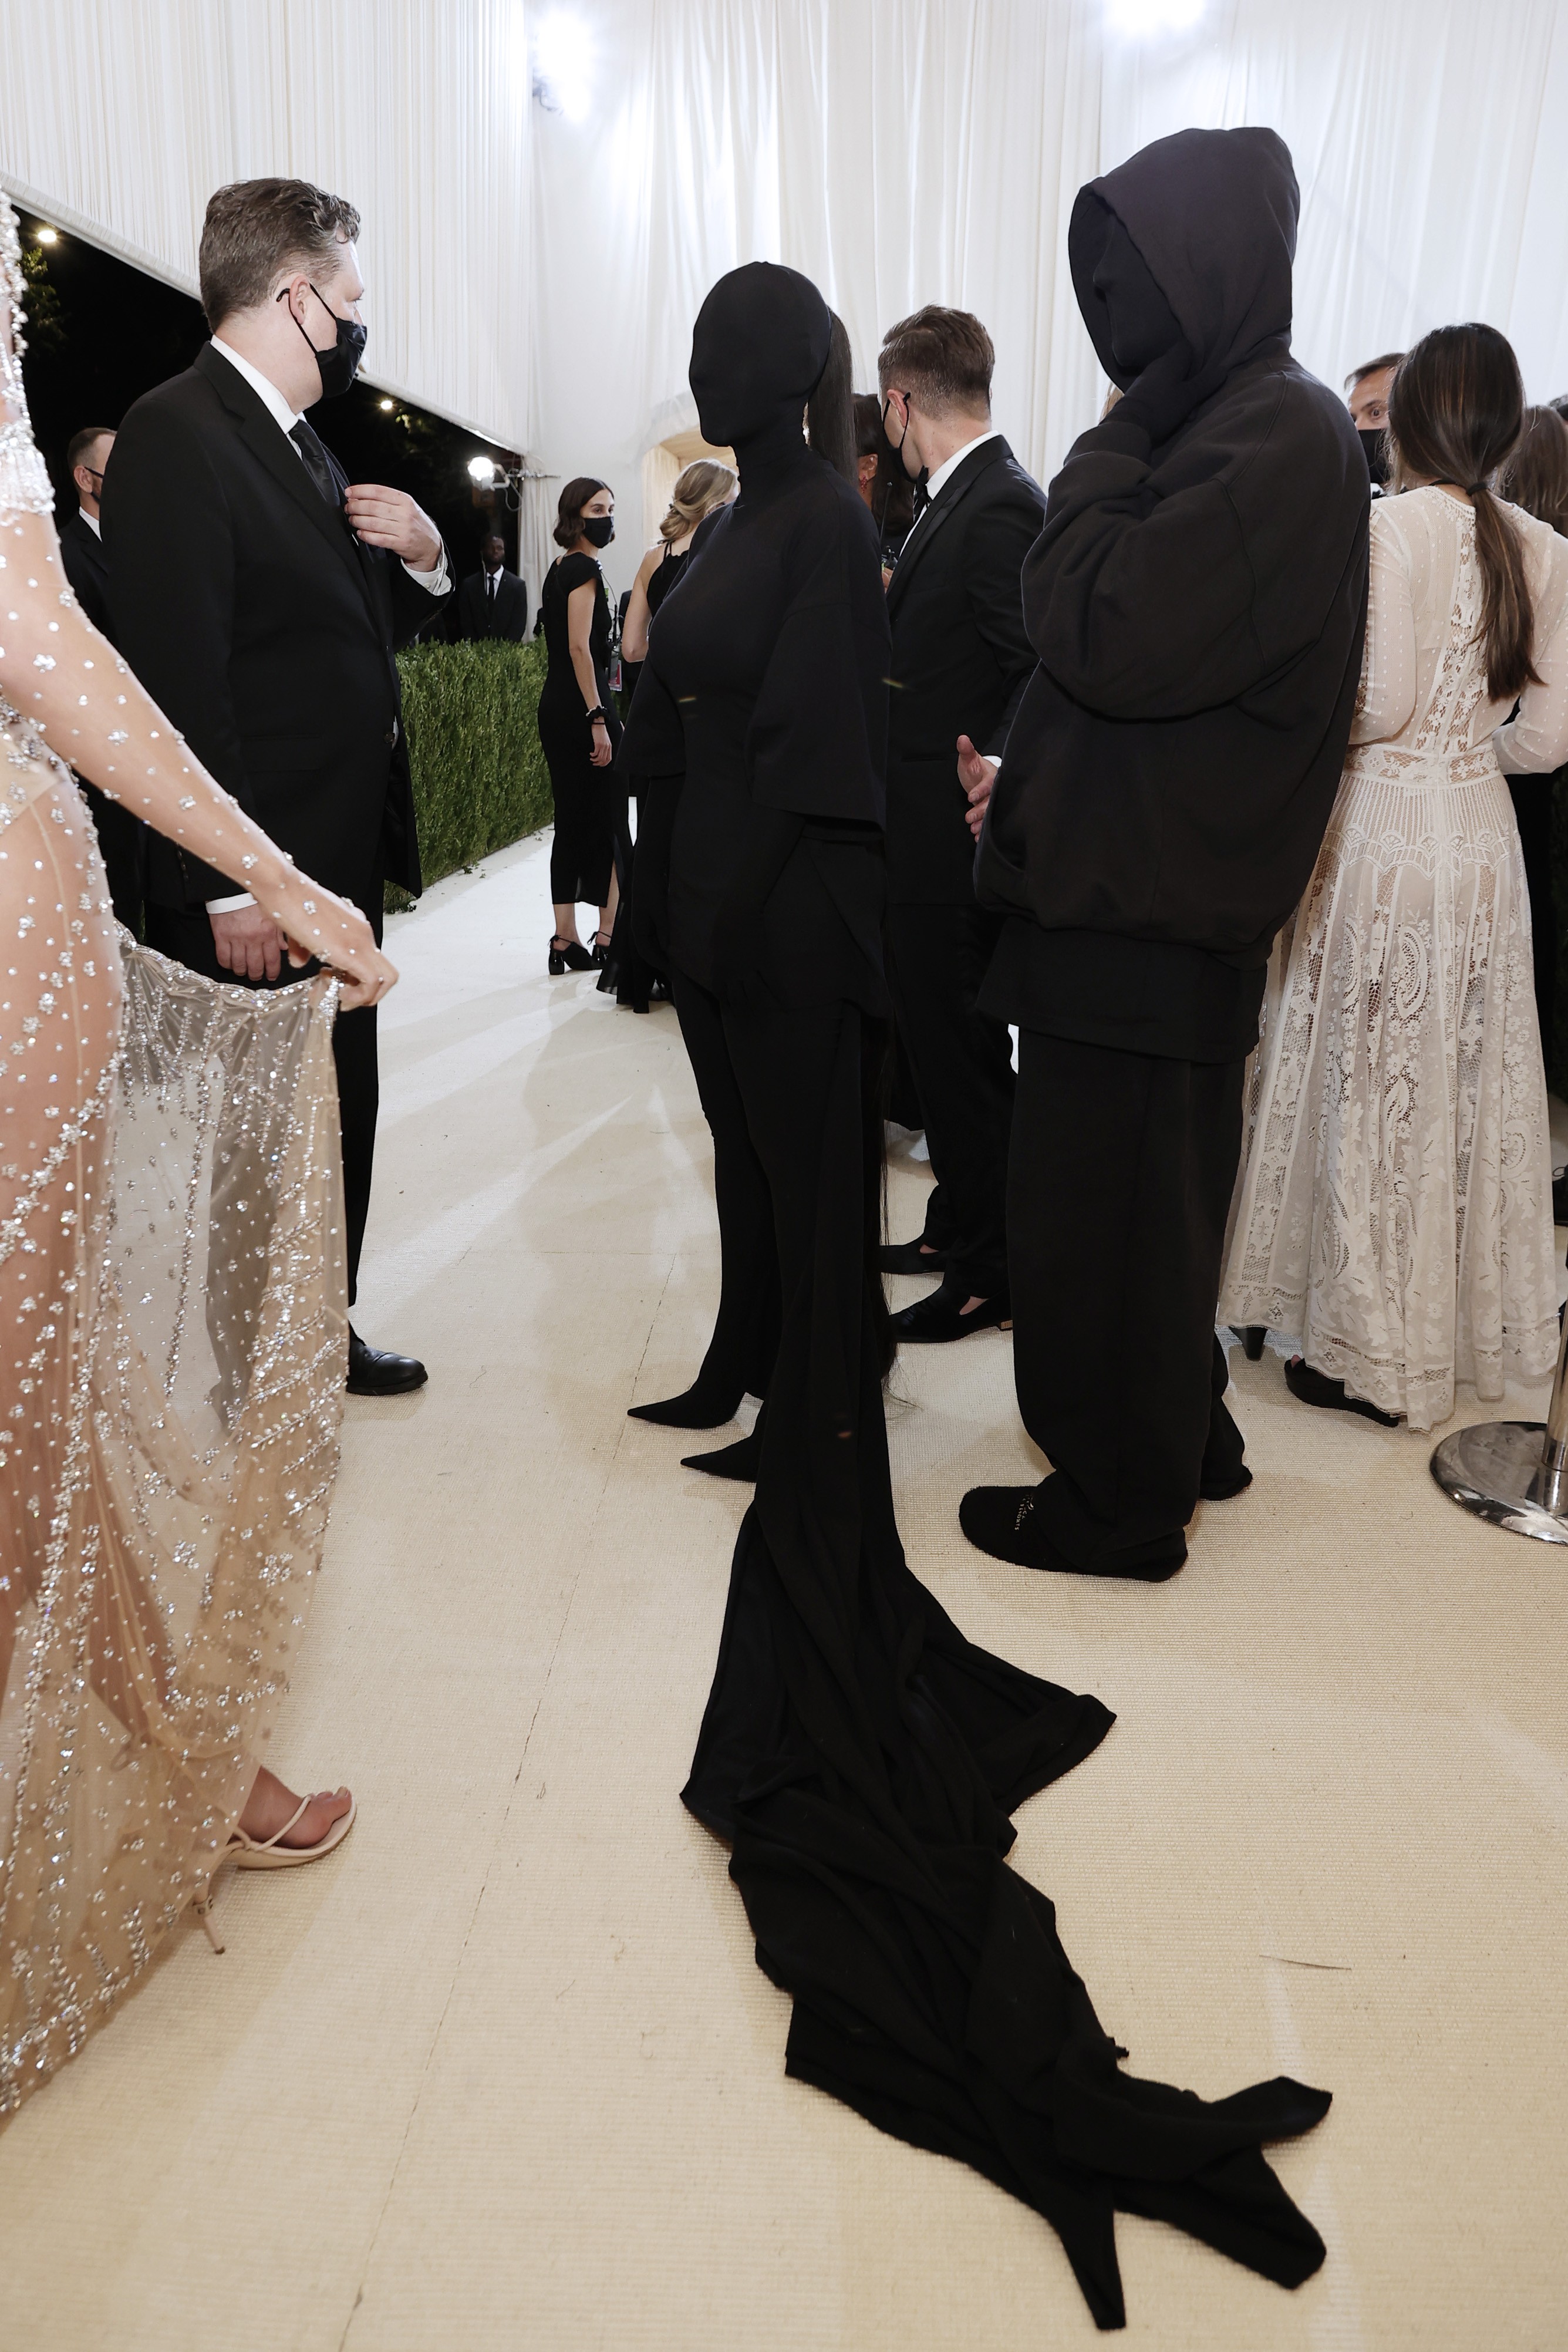 NEW YORK, NEW YORK - SEPTEMBER 13: Kim Kardashian West attends The 2021 Met Gala Celebrating In America: A Lexicon Of Fashion at Metropolitan Museum of Art on September 13, 2021 in New York City. (Photo by Arturo Holmes/MG21/Getty Images) (Foto: Getty Images)